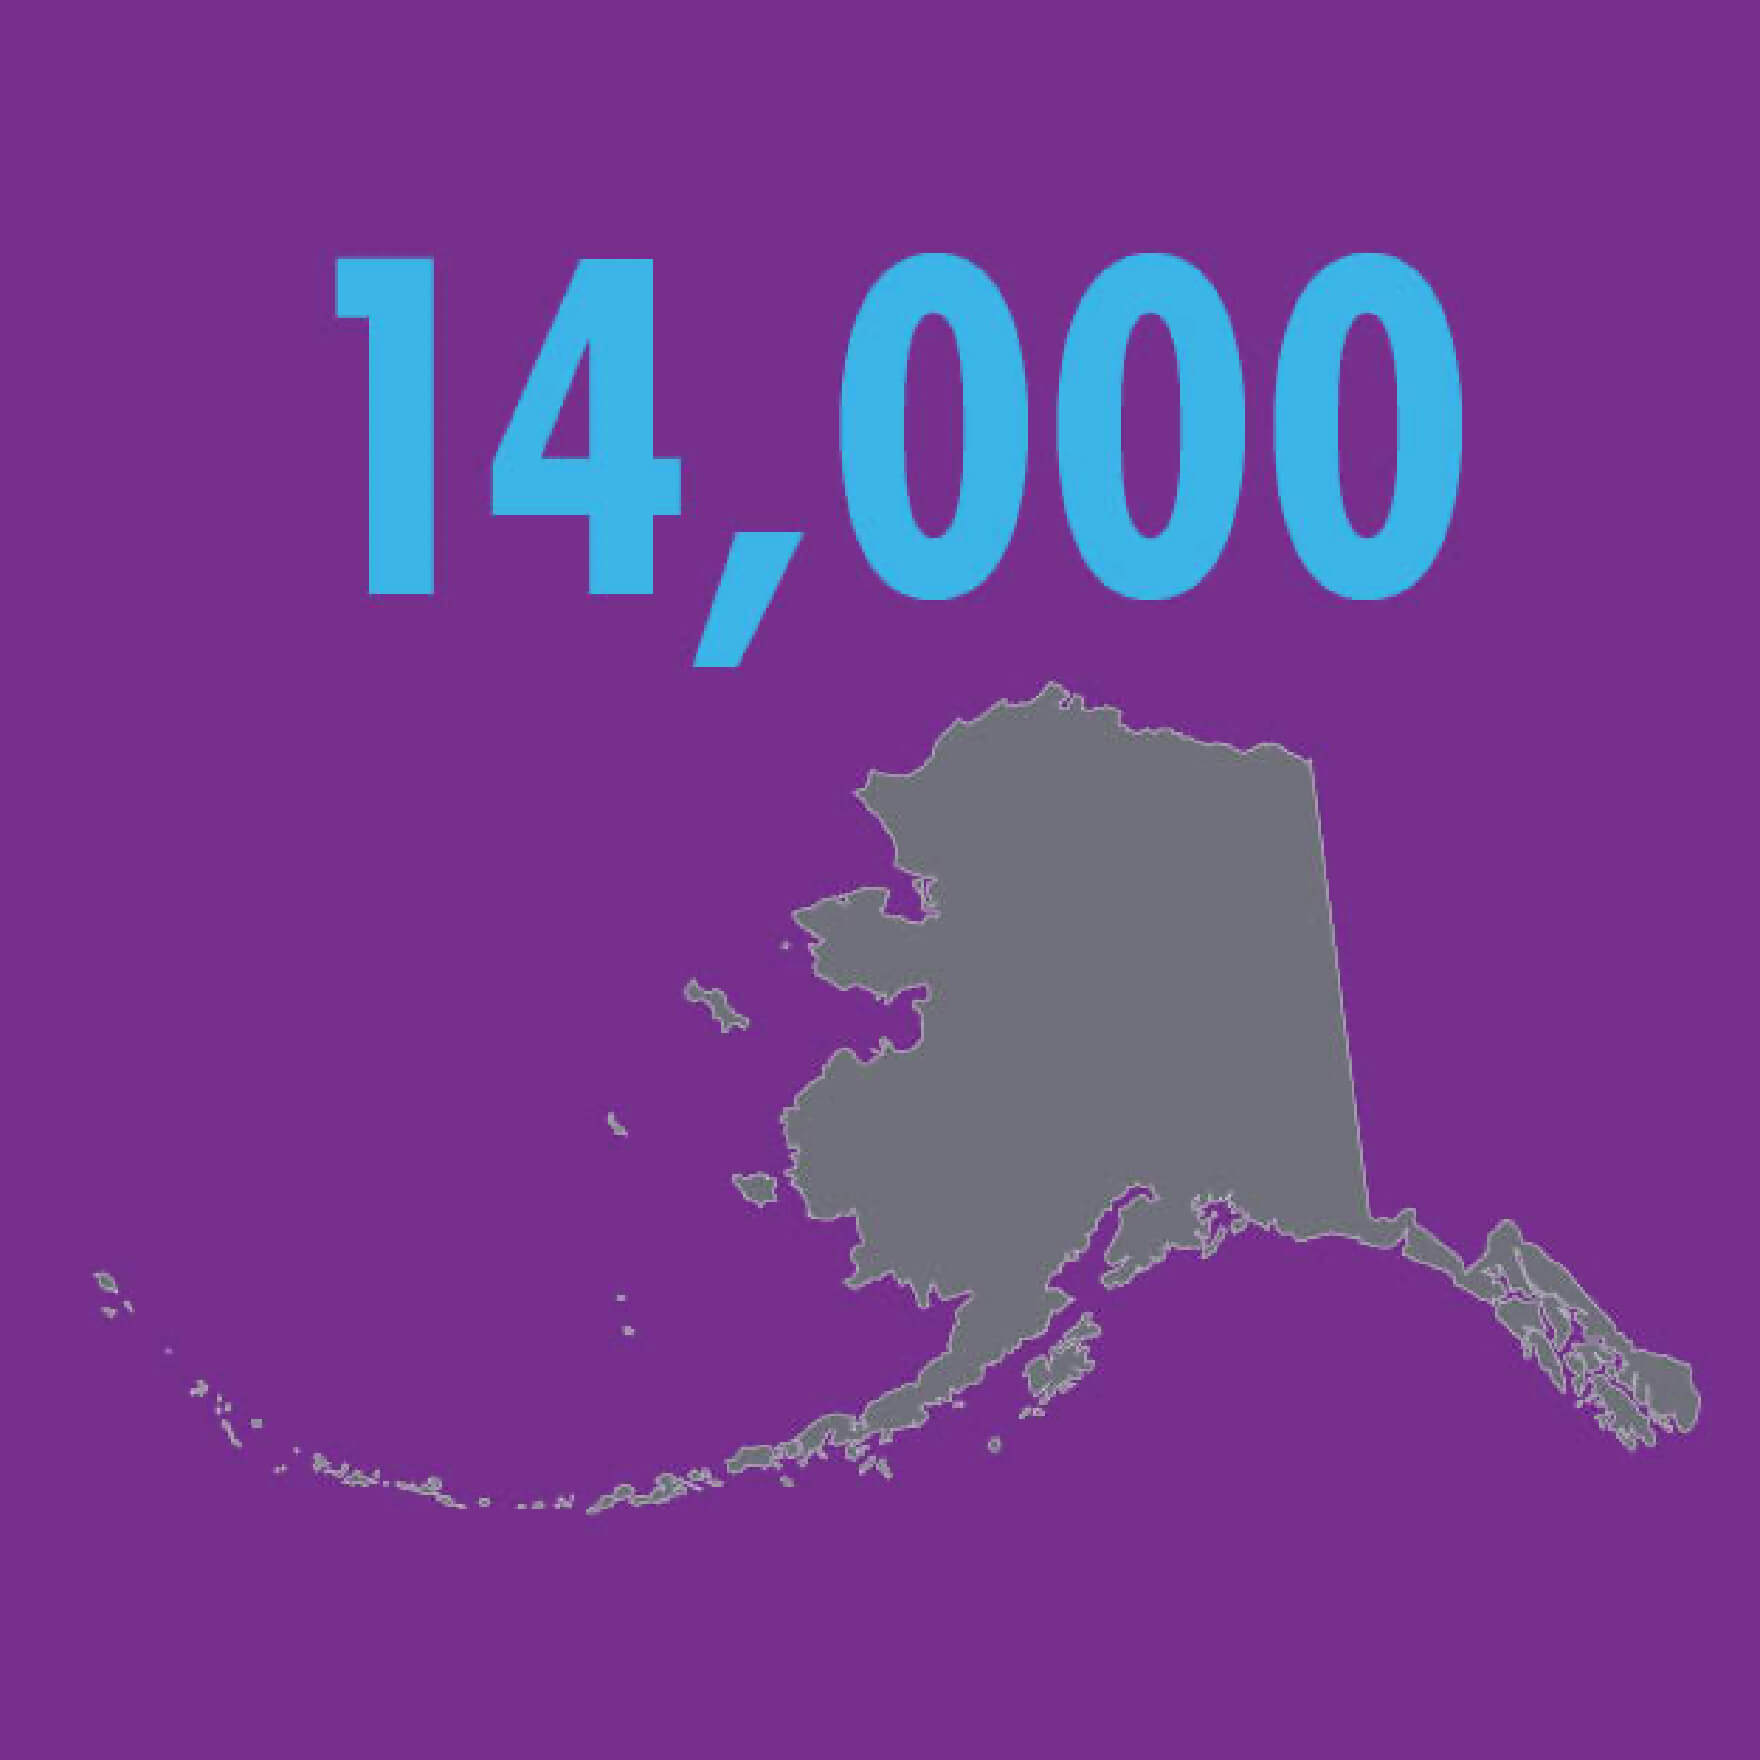 Outline of Alaska with the number 14,000